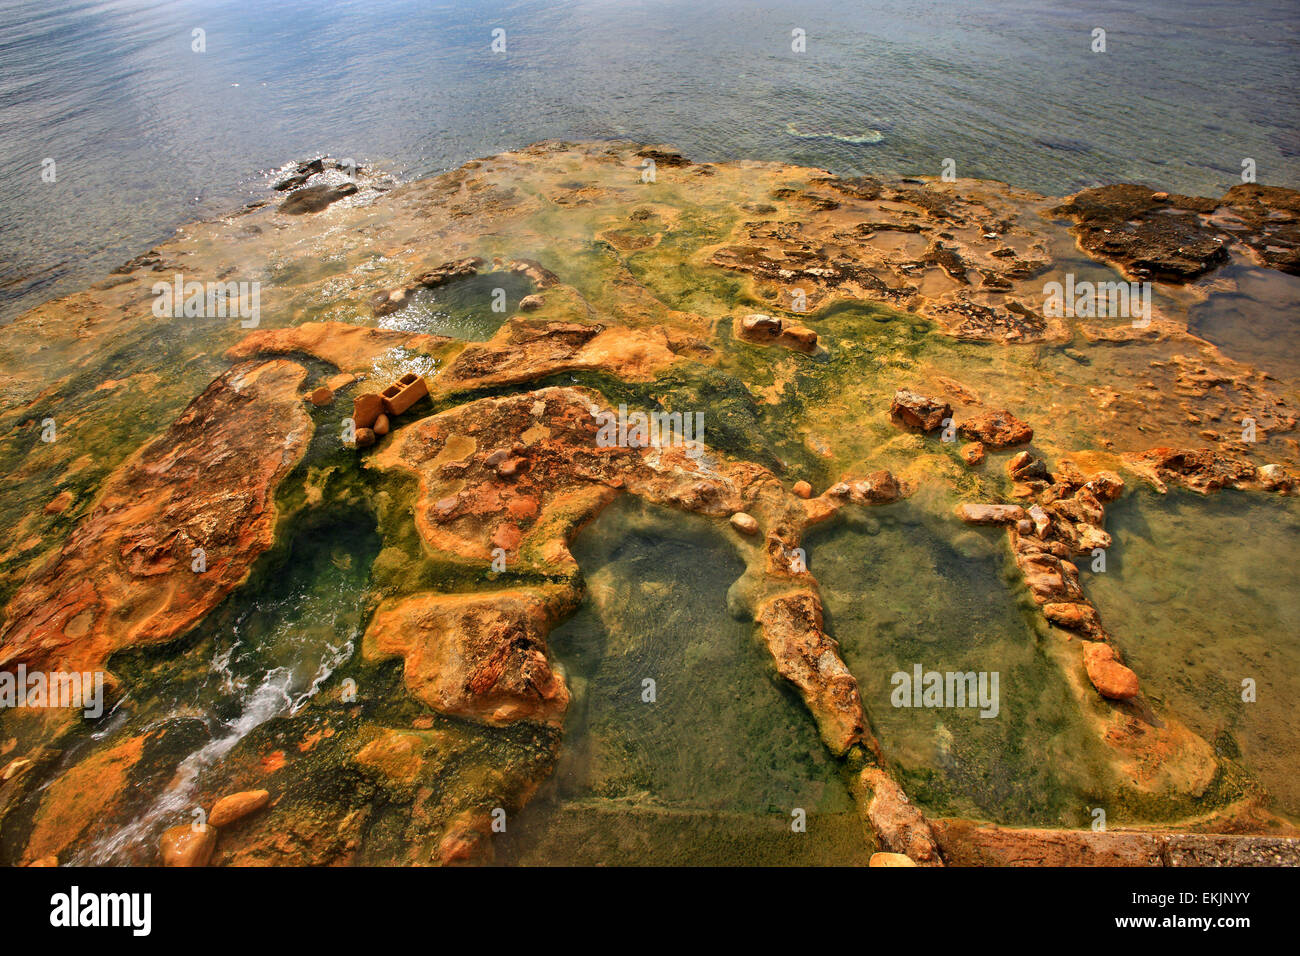 Small natural pools with water from the hot springs ext to the sea, Edipsos, North Evia island, Greece. Stock Photo